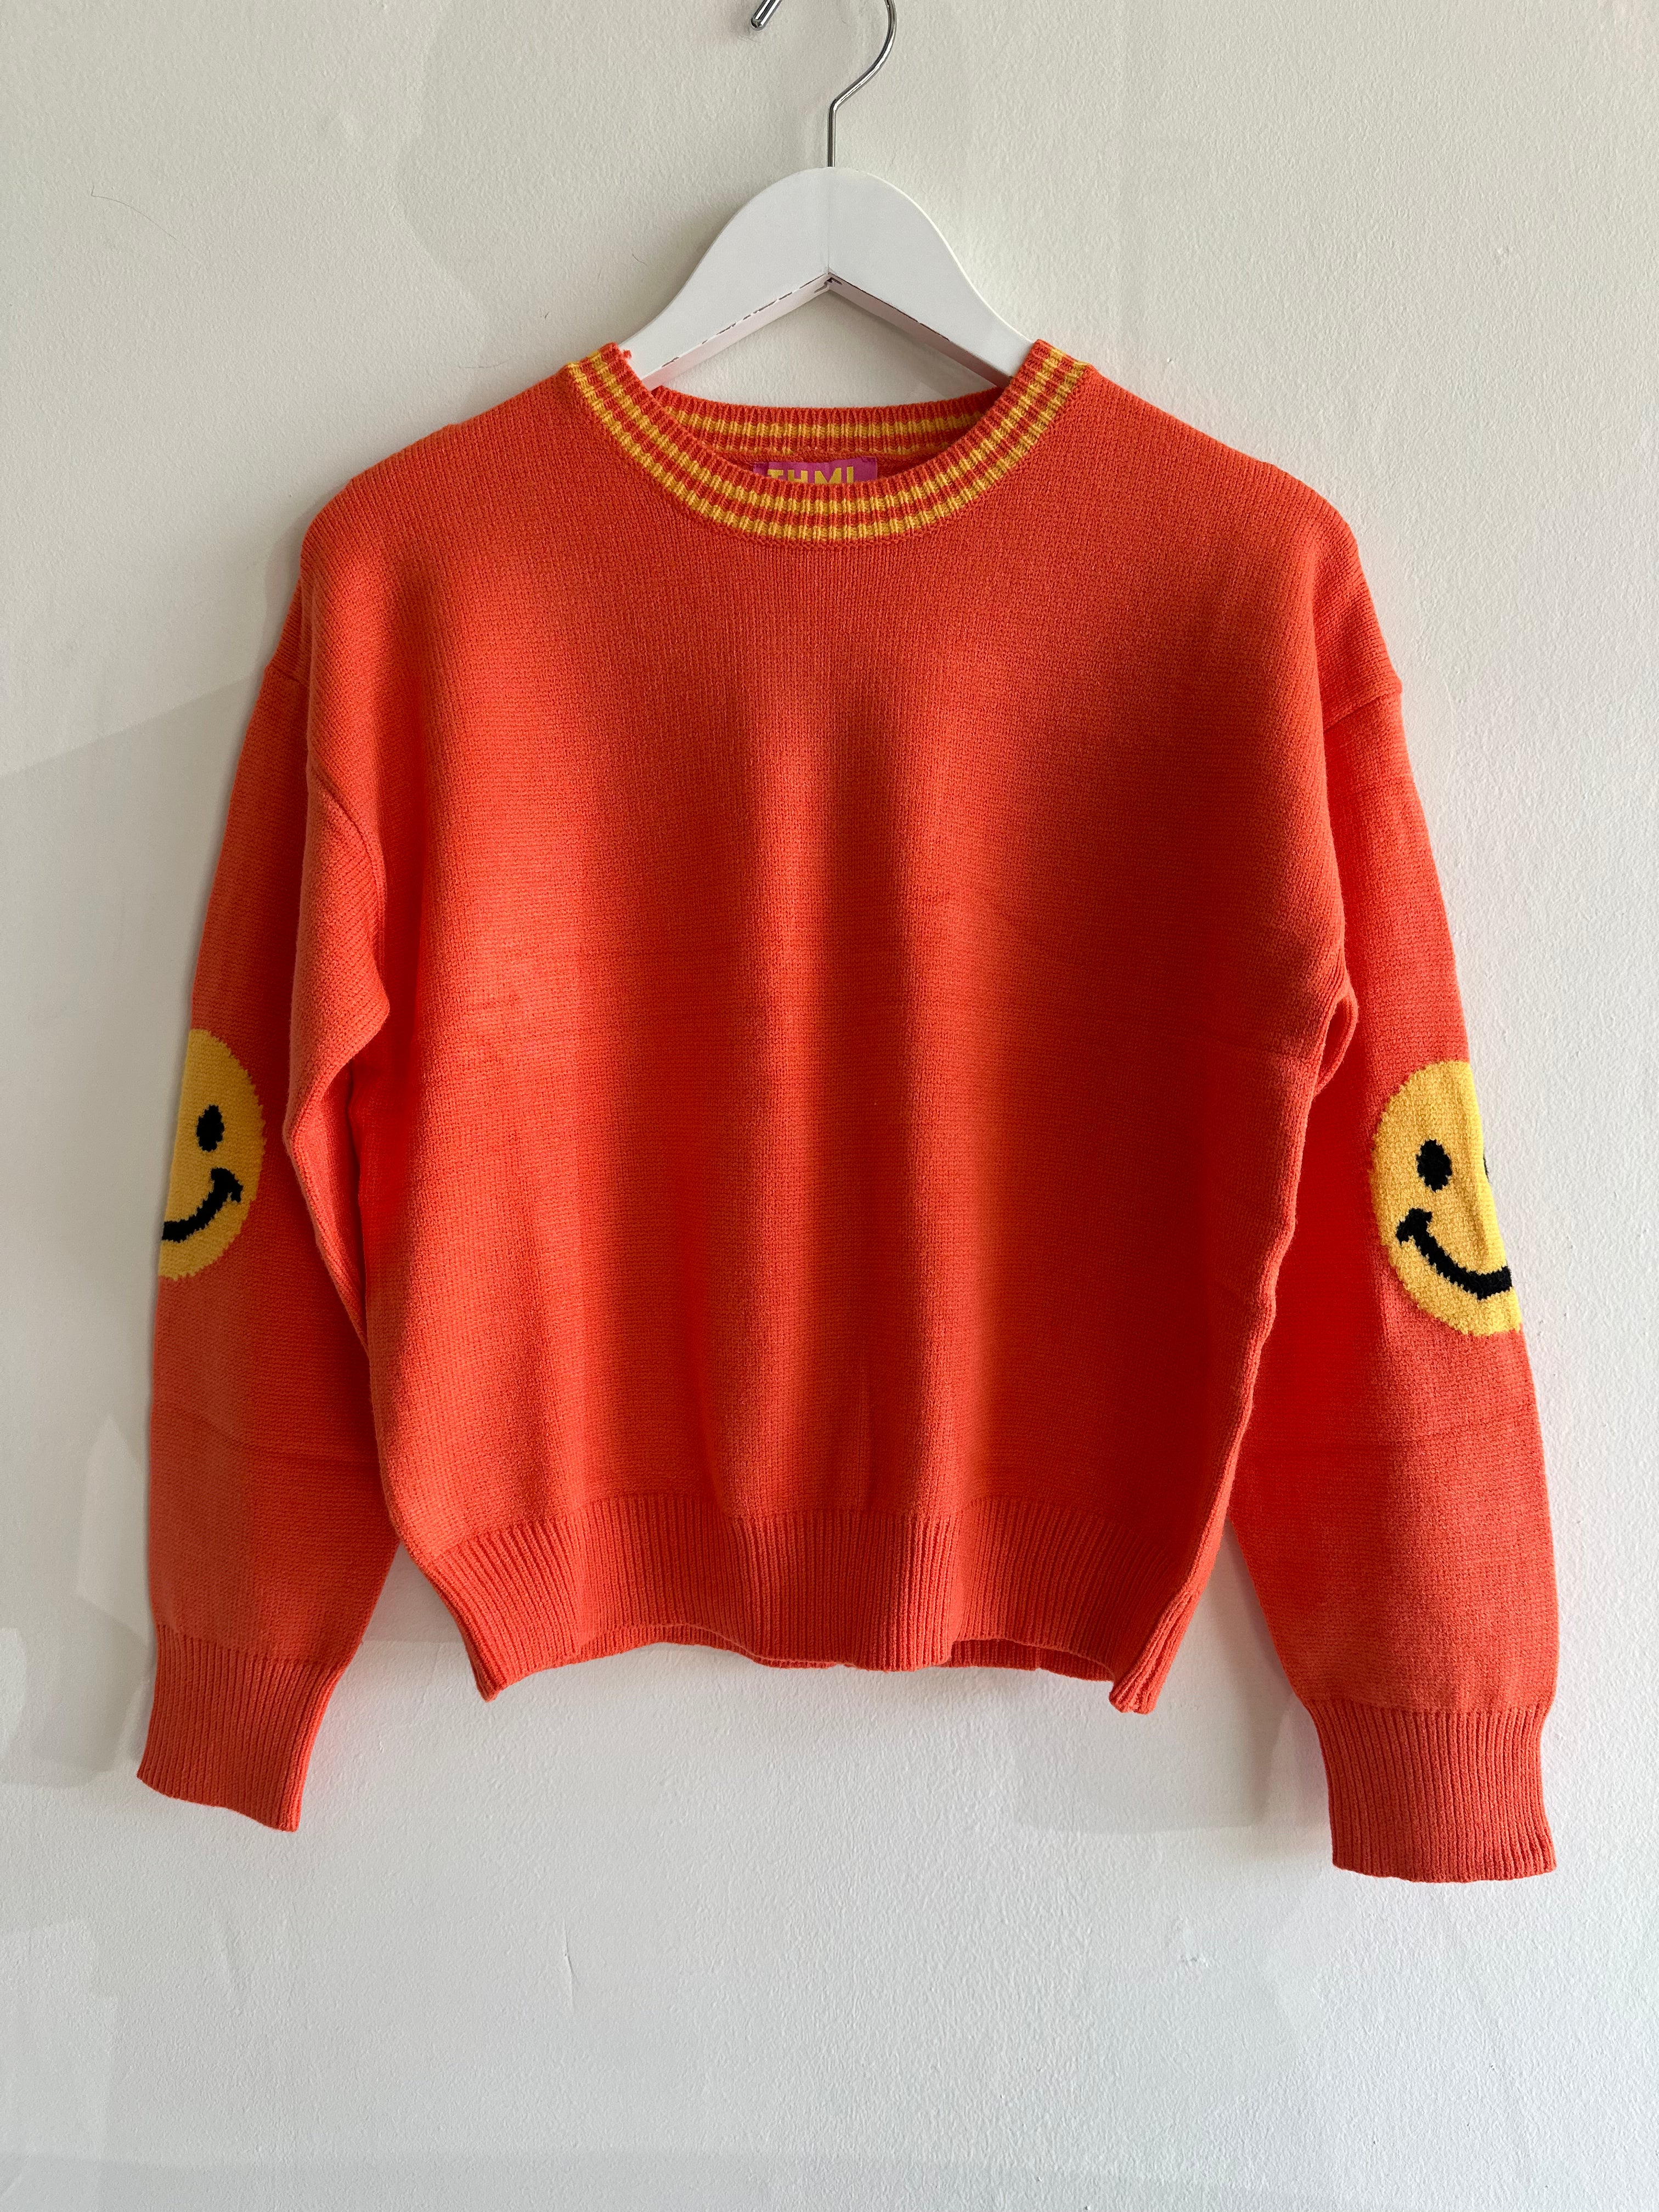 SMILEY SLEEVE KNIT SWEATER